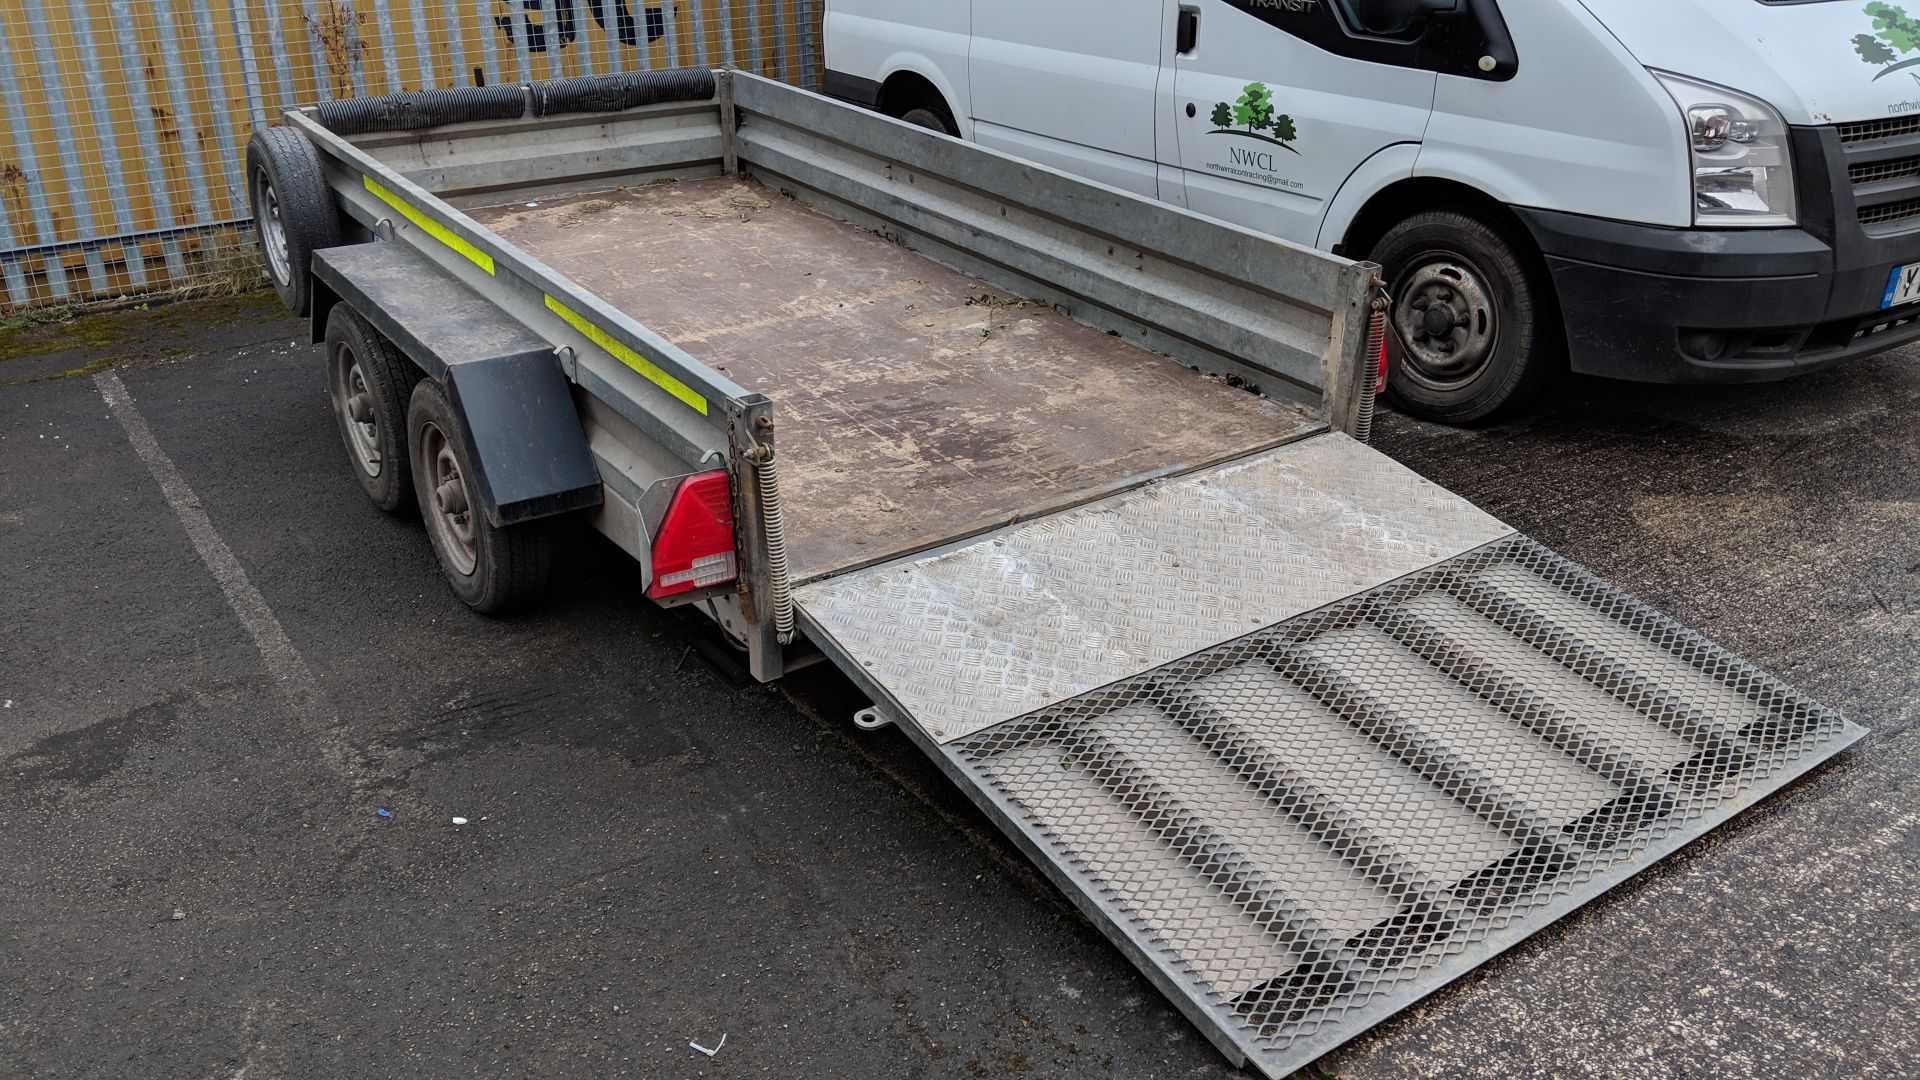 Indespension 2600kg twin axle 10x5 trailer with fold down loading ramp at one end, marked Type V7 on - Image 13 of 17